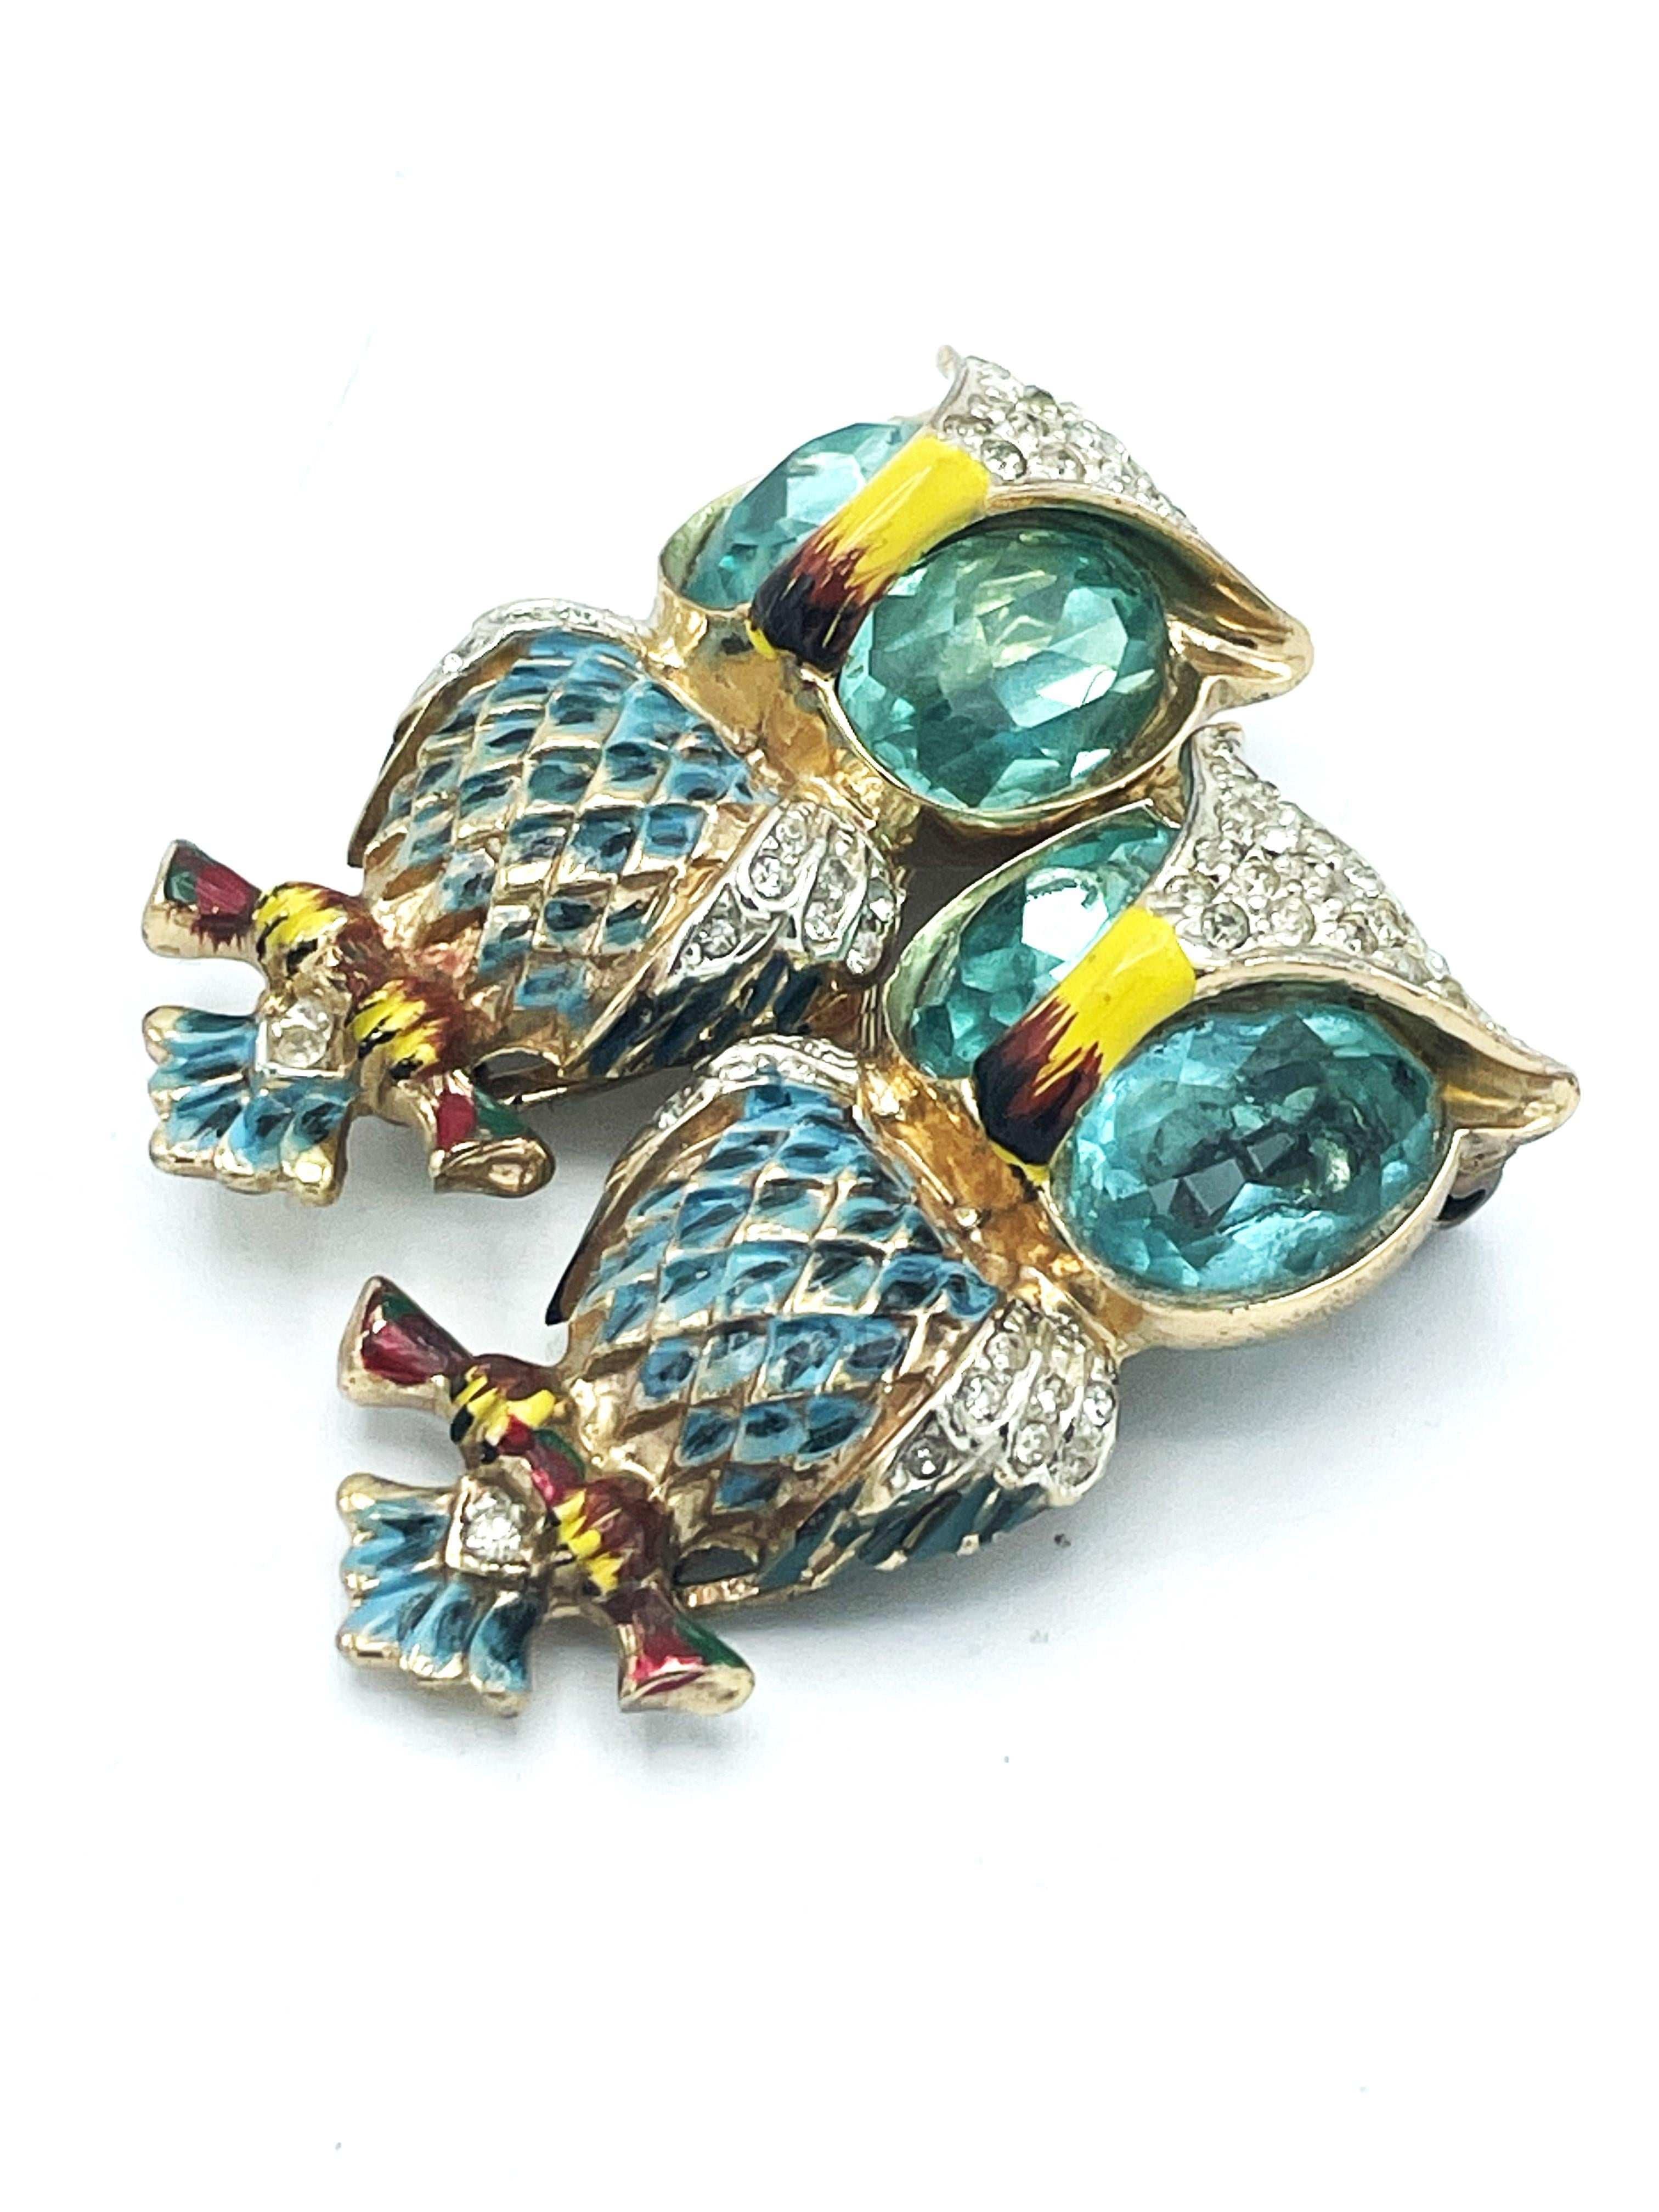 CORO DUETT OWL BROOCH, dating 1944 Sterling Silver, USA aquamarines and enamel  For Sale 1